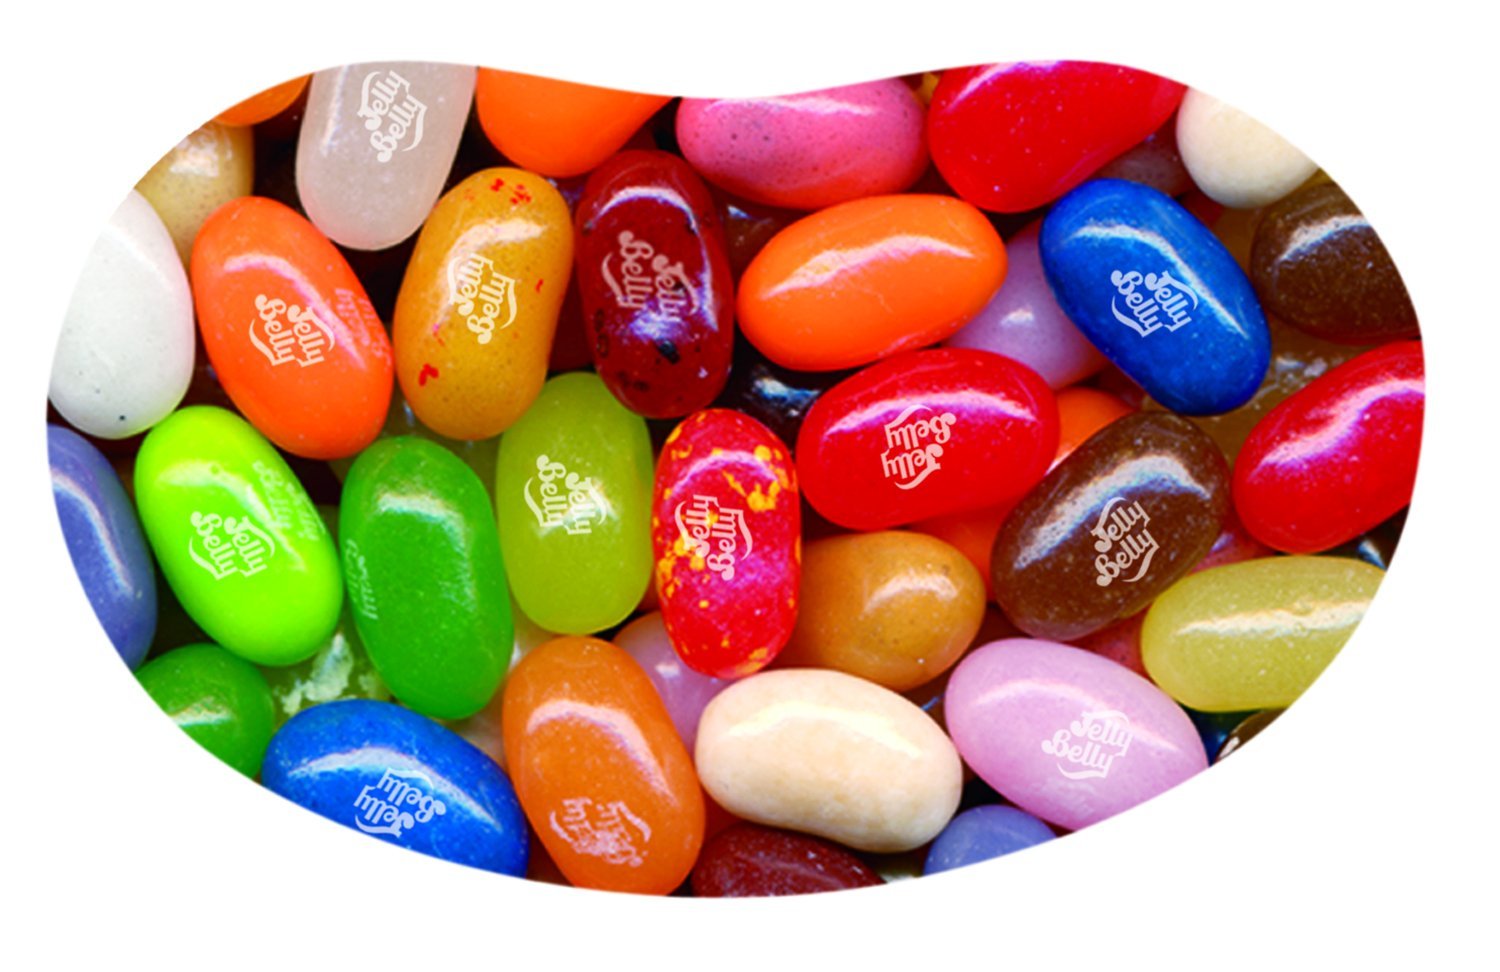 jelly belly jelly beans